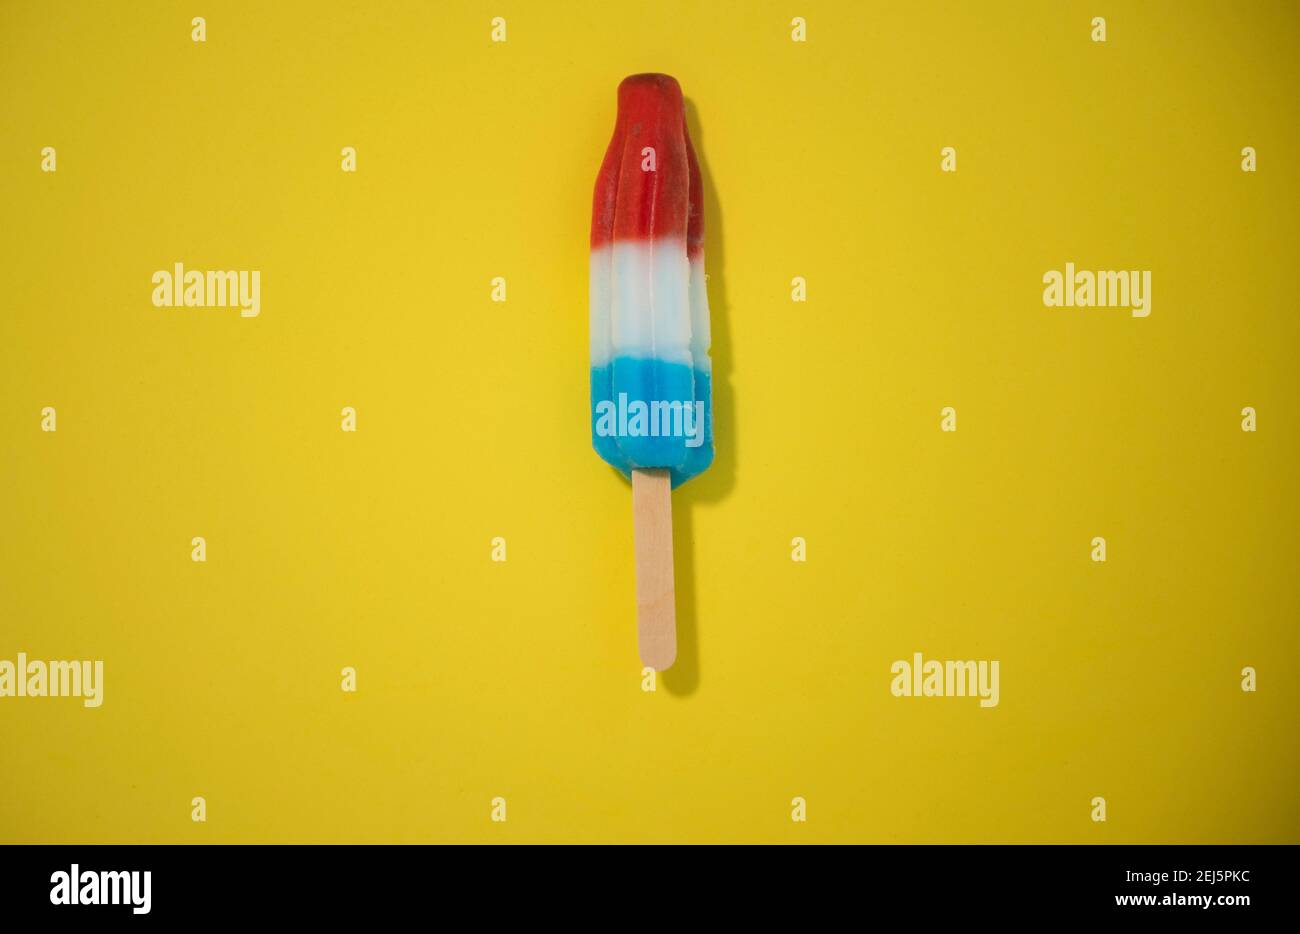 Red, White and Blue Novelty ice cream bombpop shot on yellow background, stop action animation exploding like fireworks. Series 1 of 8. Stock Photo